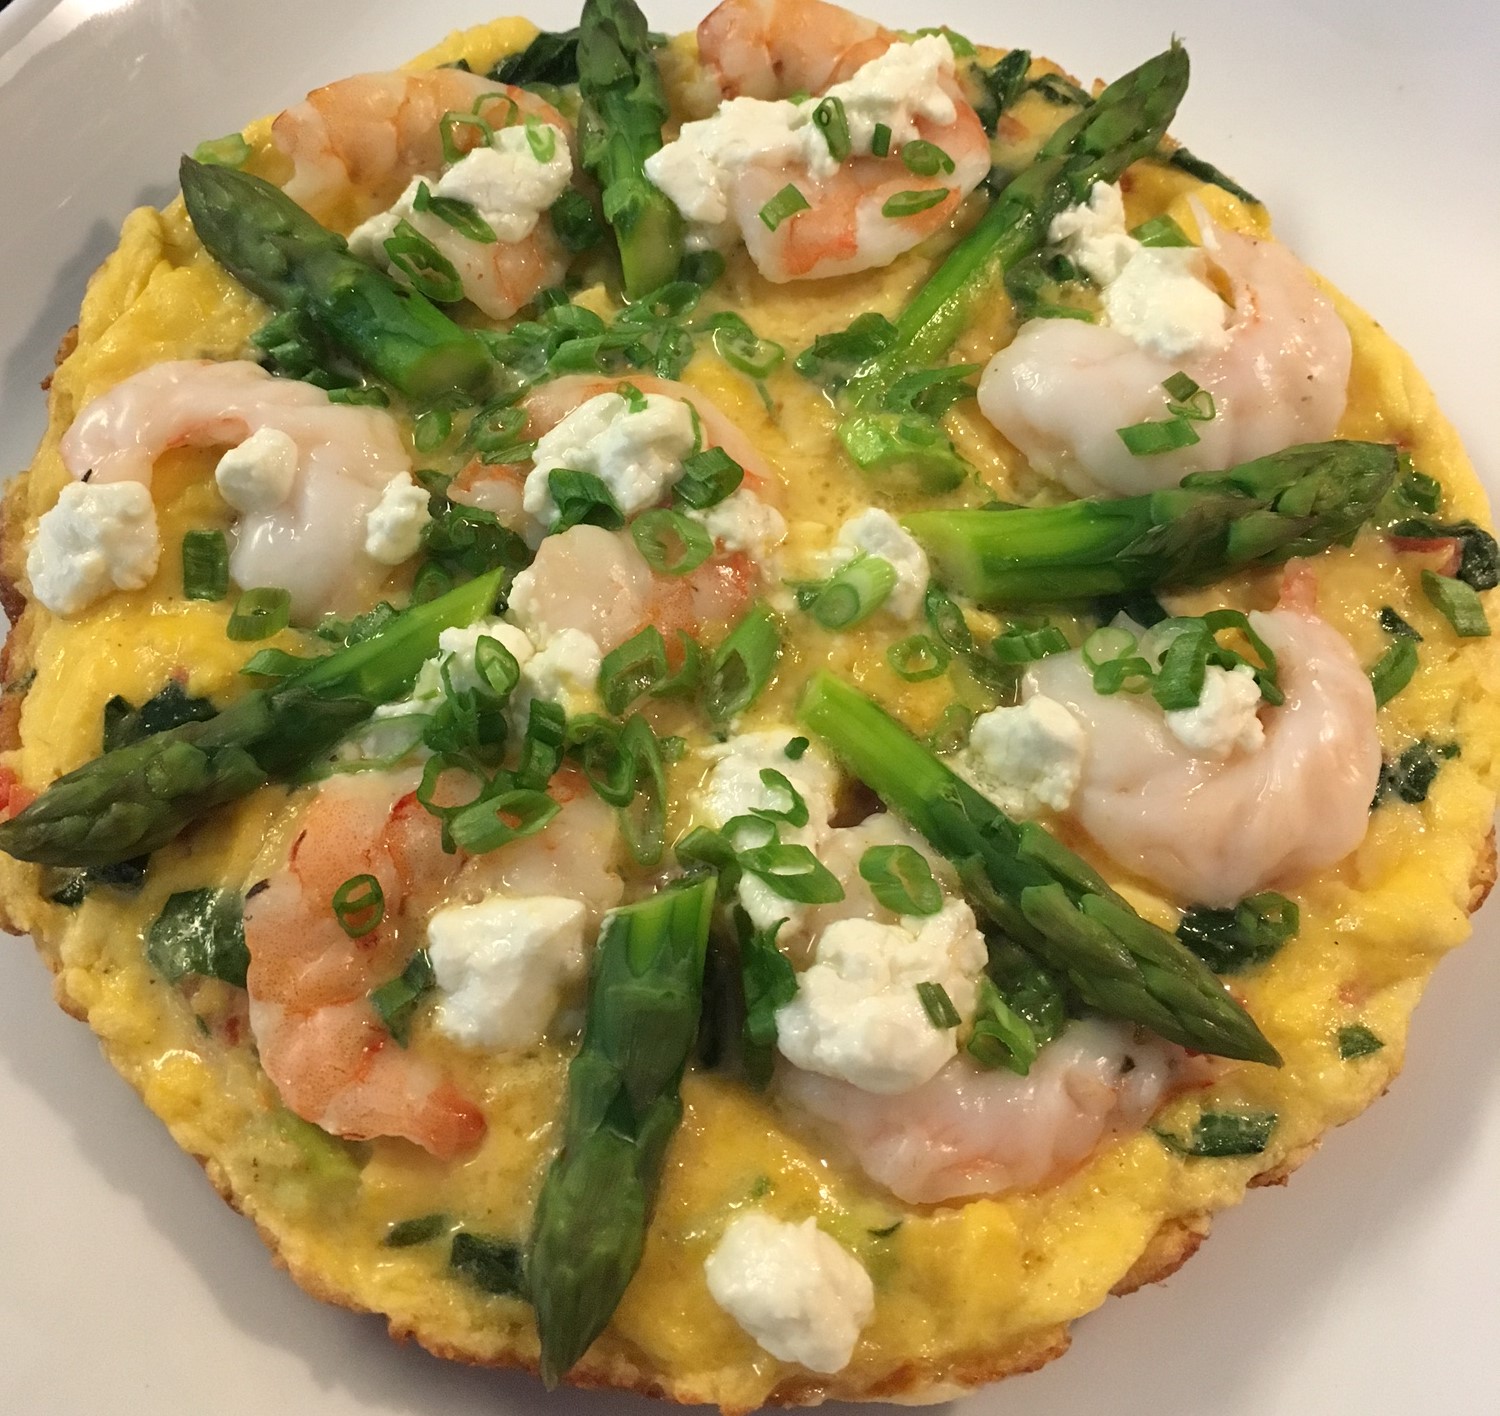 A serious Shrimp Frittata from Chef Braldey Czajka, Systems Executive Chef with Children's Healthcare of Atlanta & MHC. This dish will fit in your New Year's Diet!